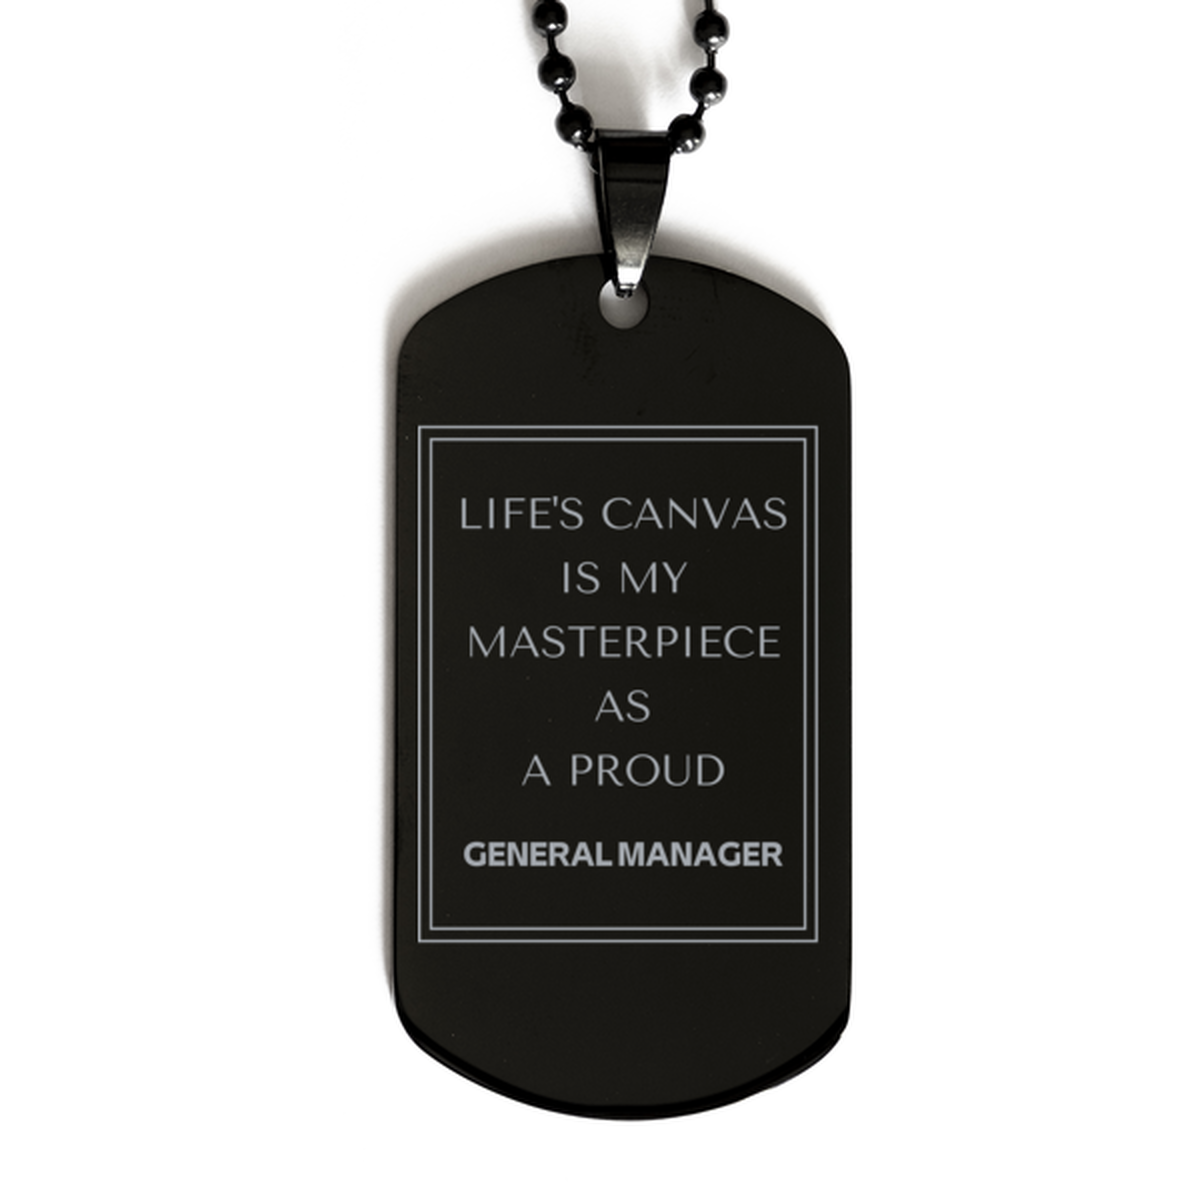 Proud General Manager Gifts, Life's canvas is my masterpiece, Epic Birthday Christmas Unique Black Dog Tag For General Manager, Coworkers, Men, Women, Friends